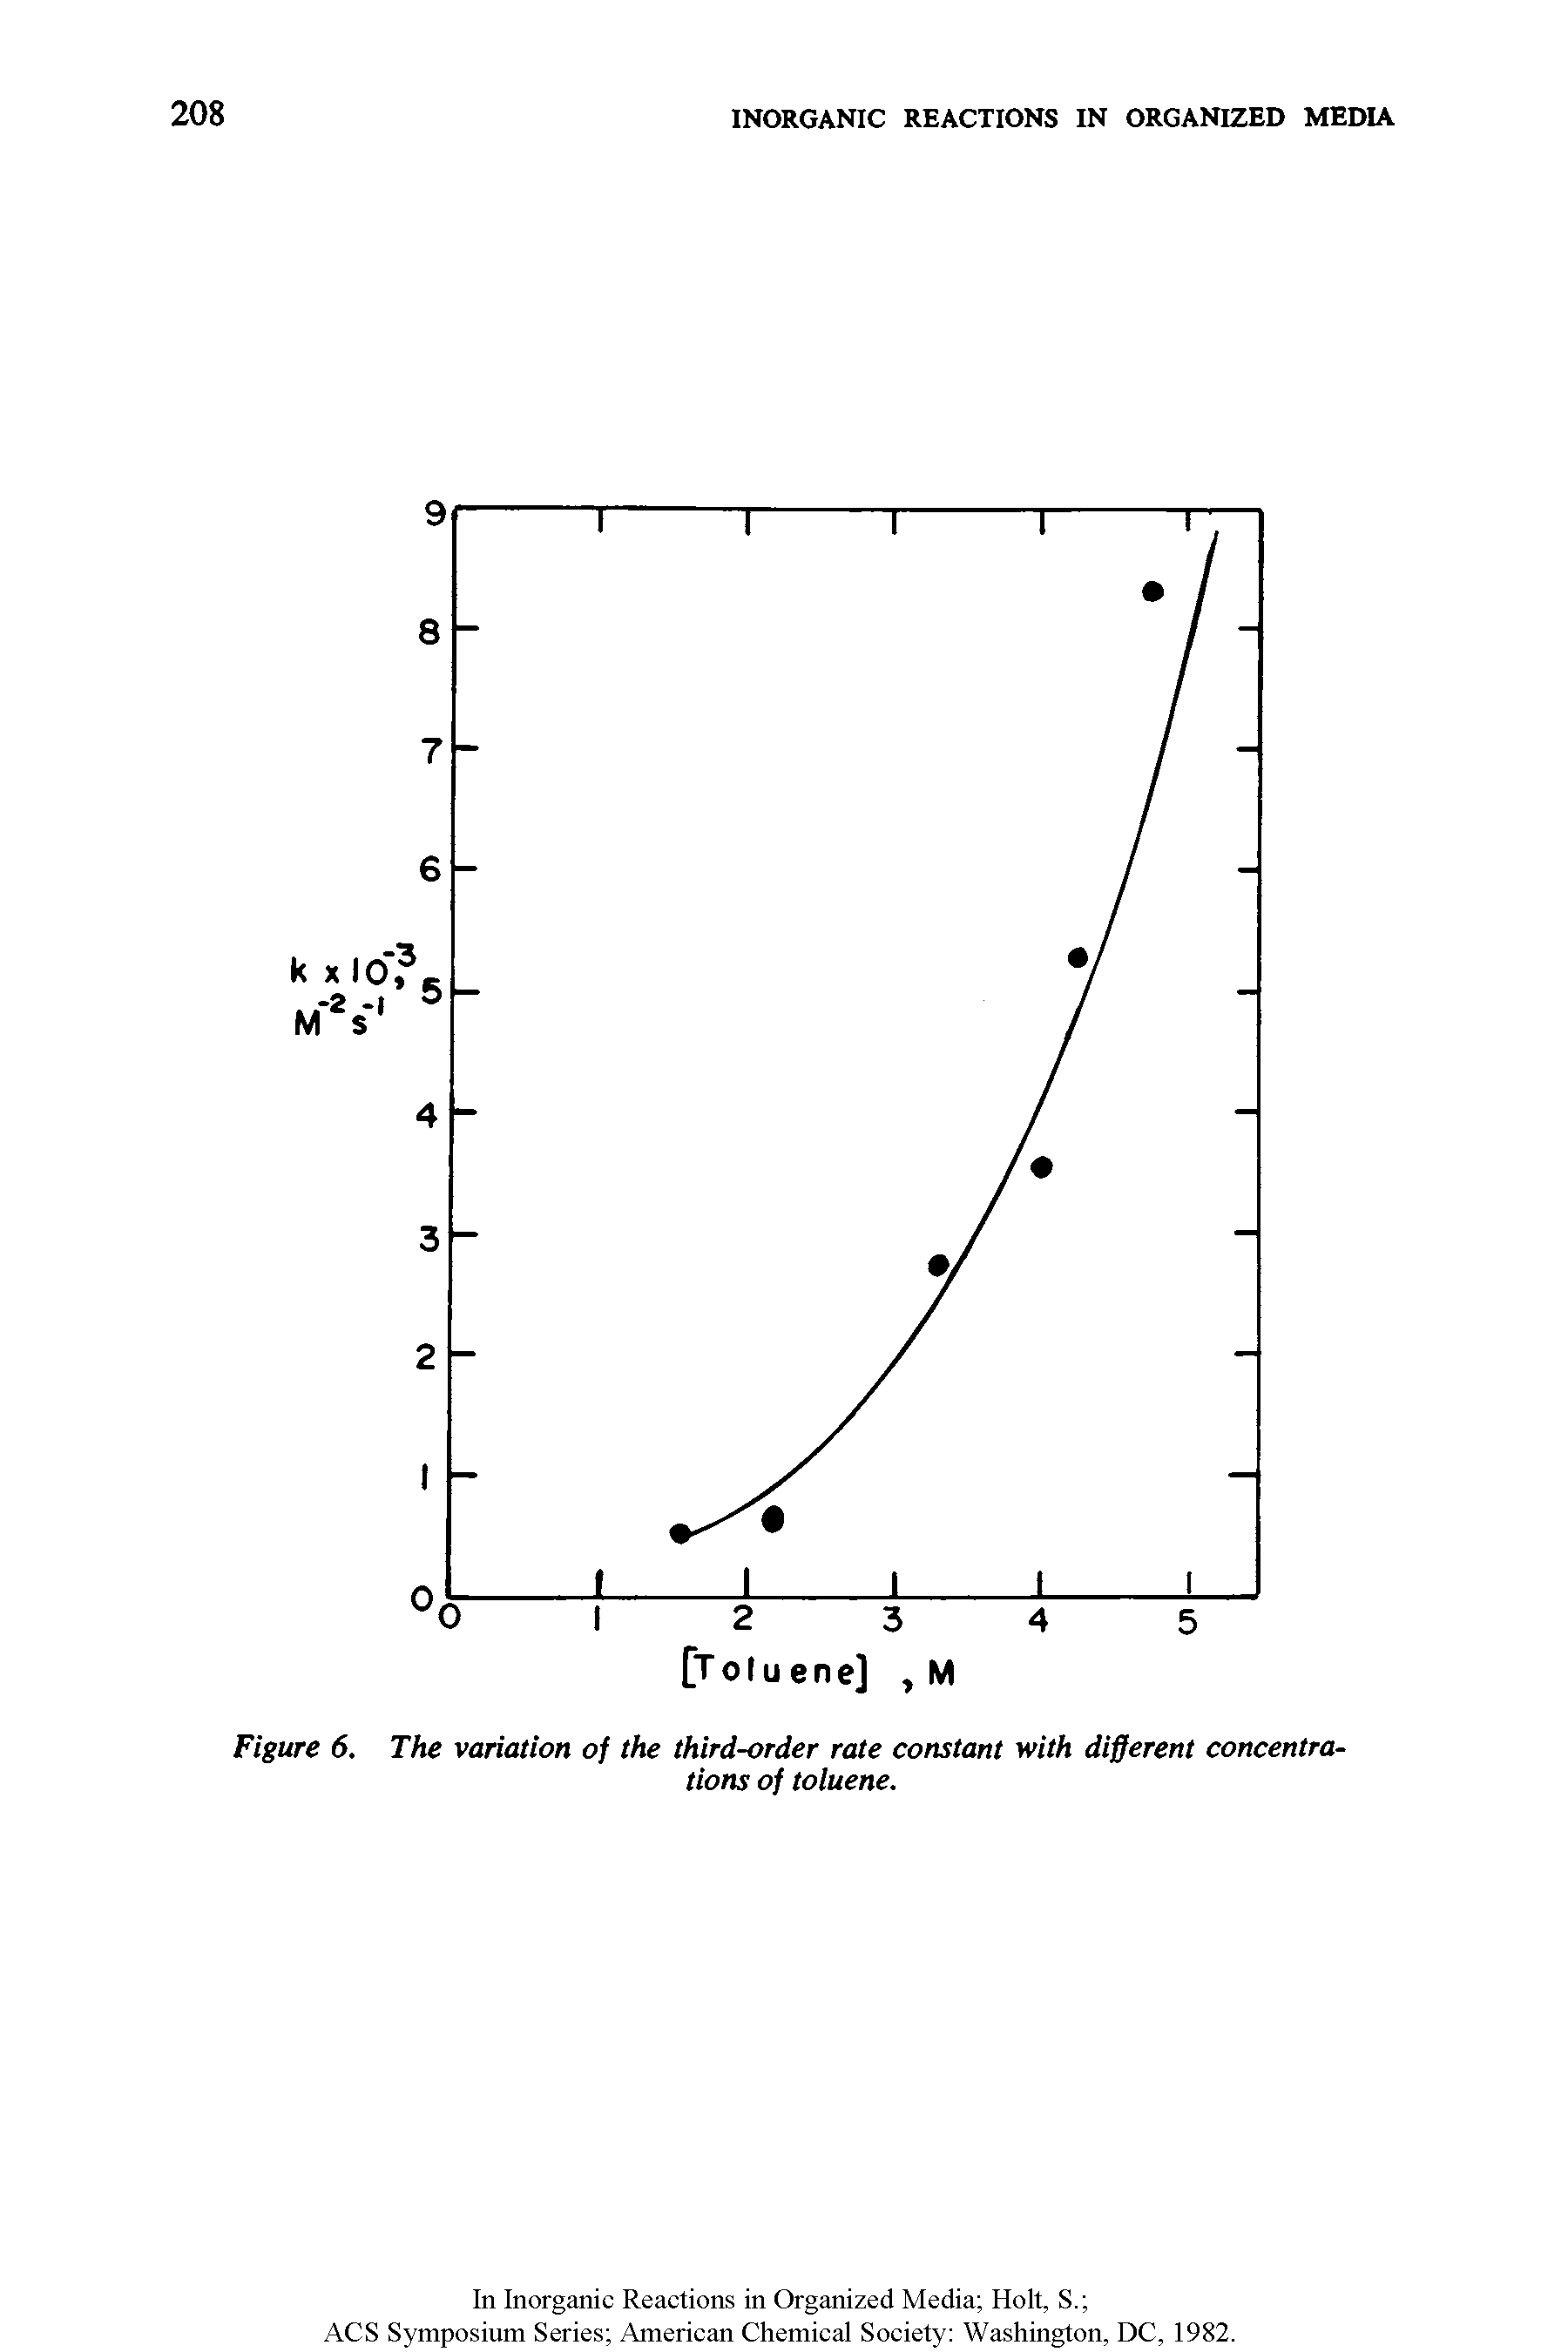 Figure 6. The variation of the third-order rate constant with different concentrations of toiuene.